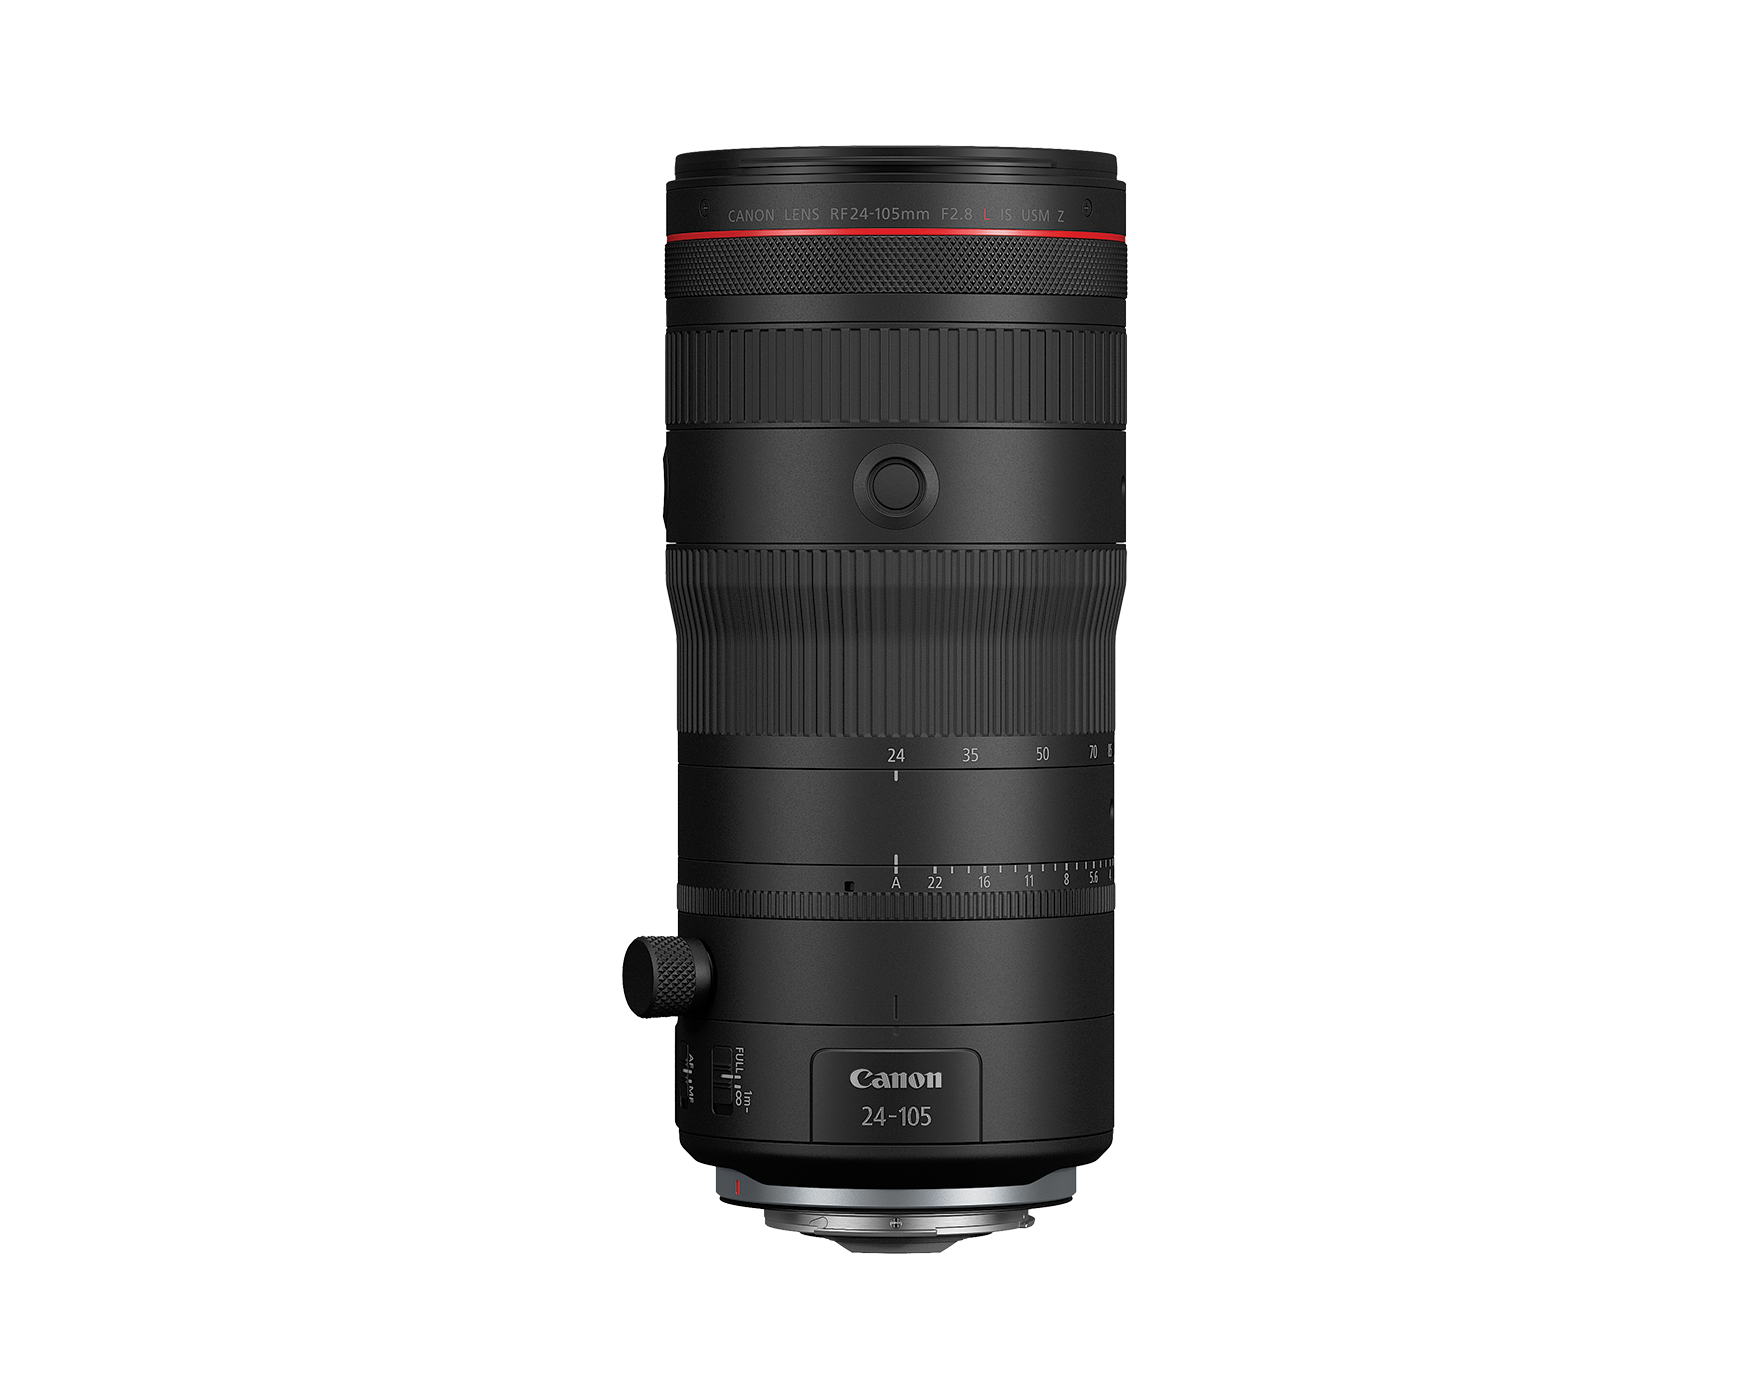 pr rf24 105mm 1 - Canon Introduces Three New Lenses, Enhancing Still Photography and Video Production for Any Skill Level